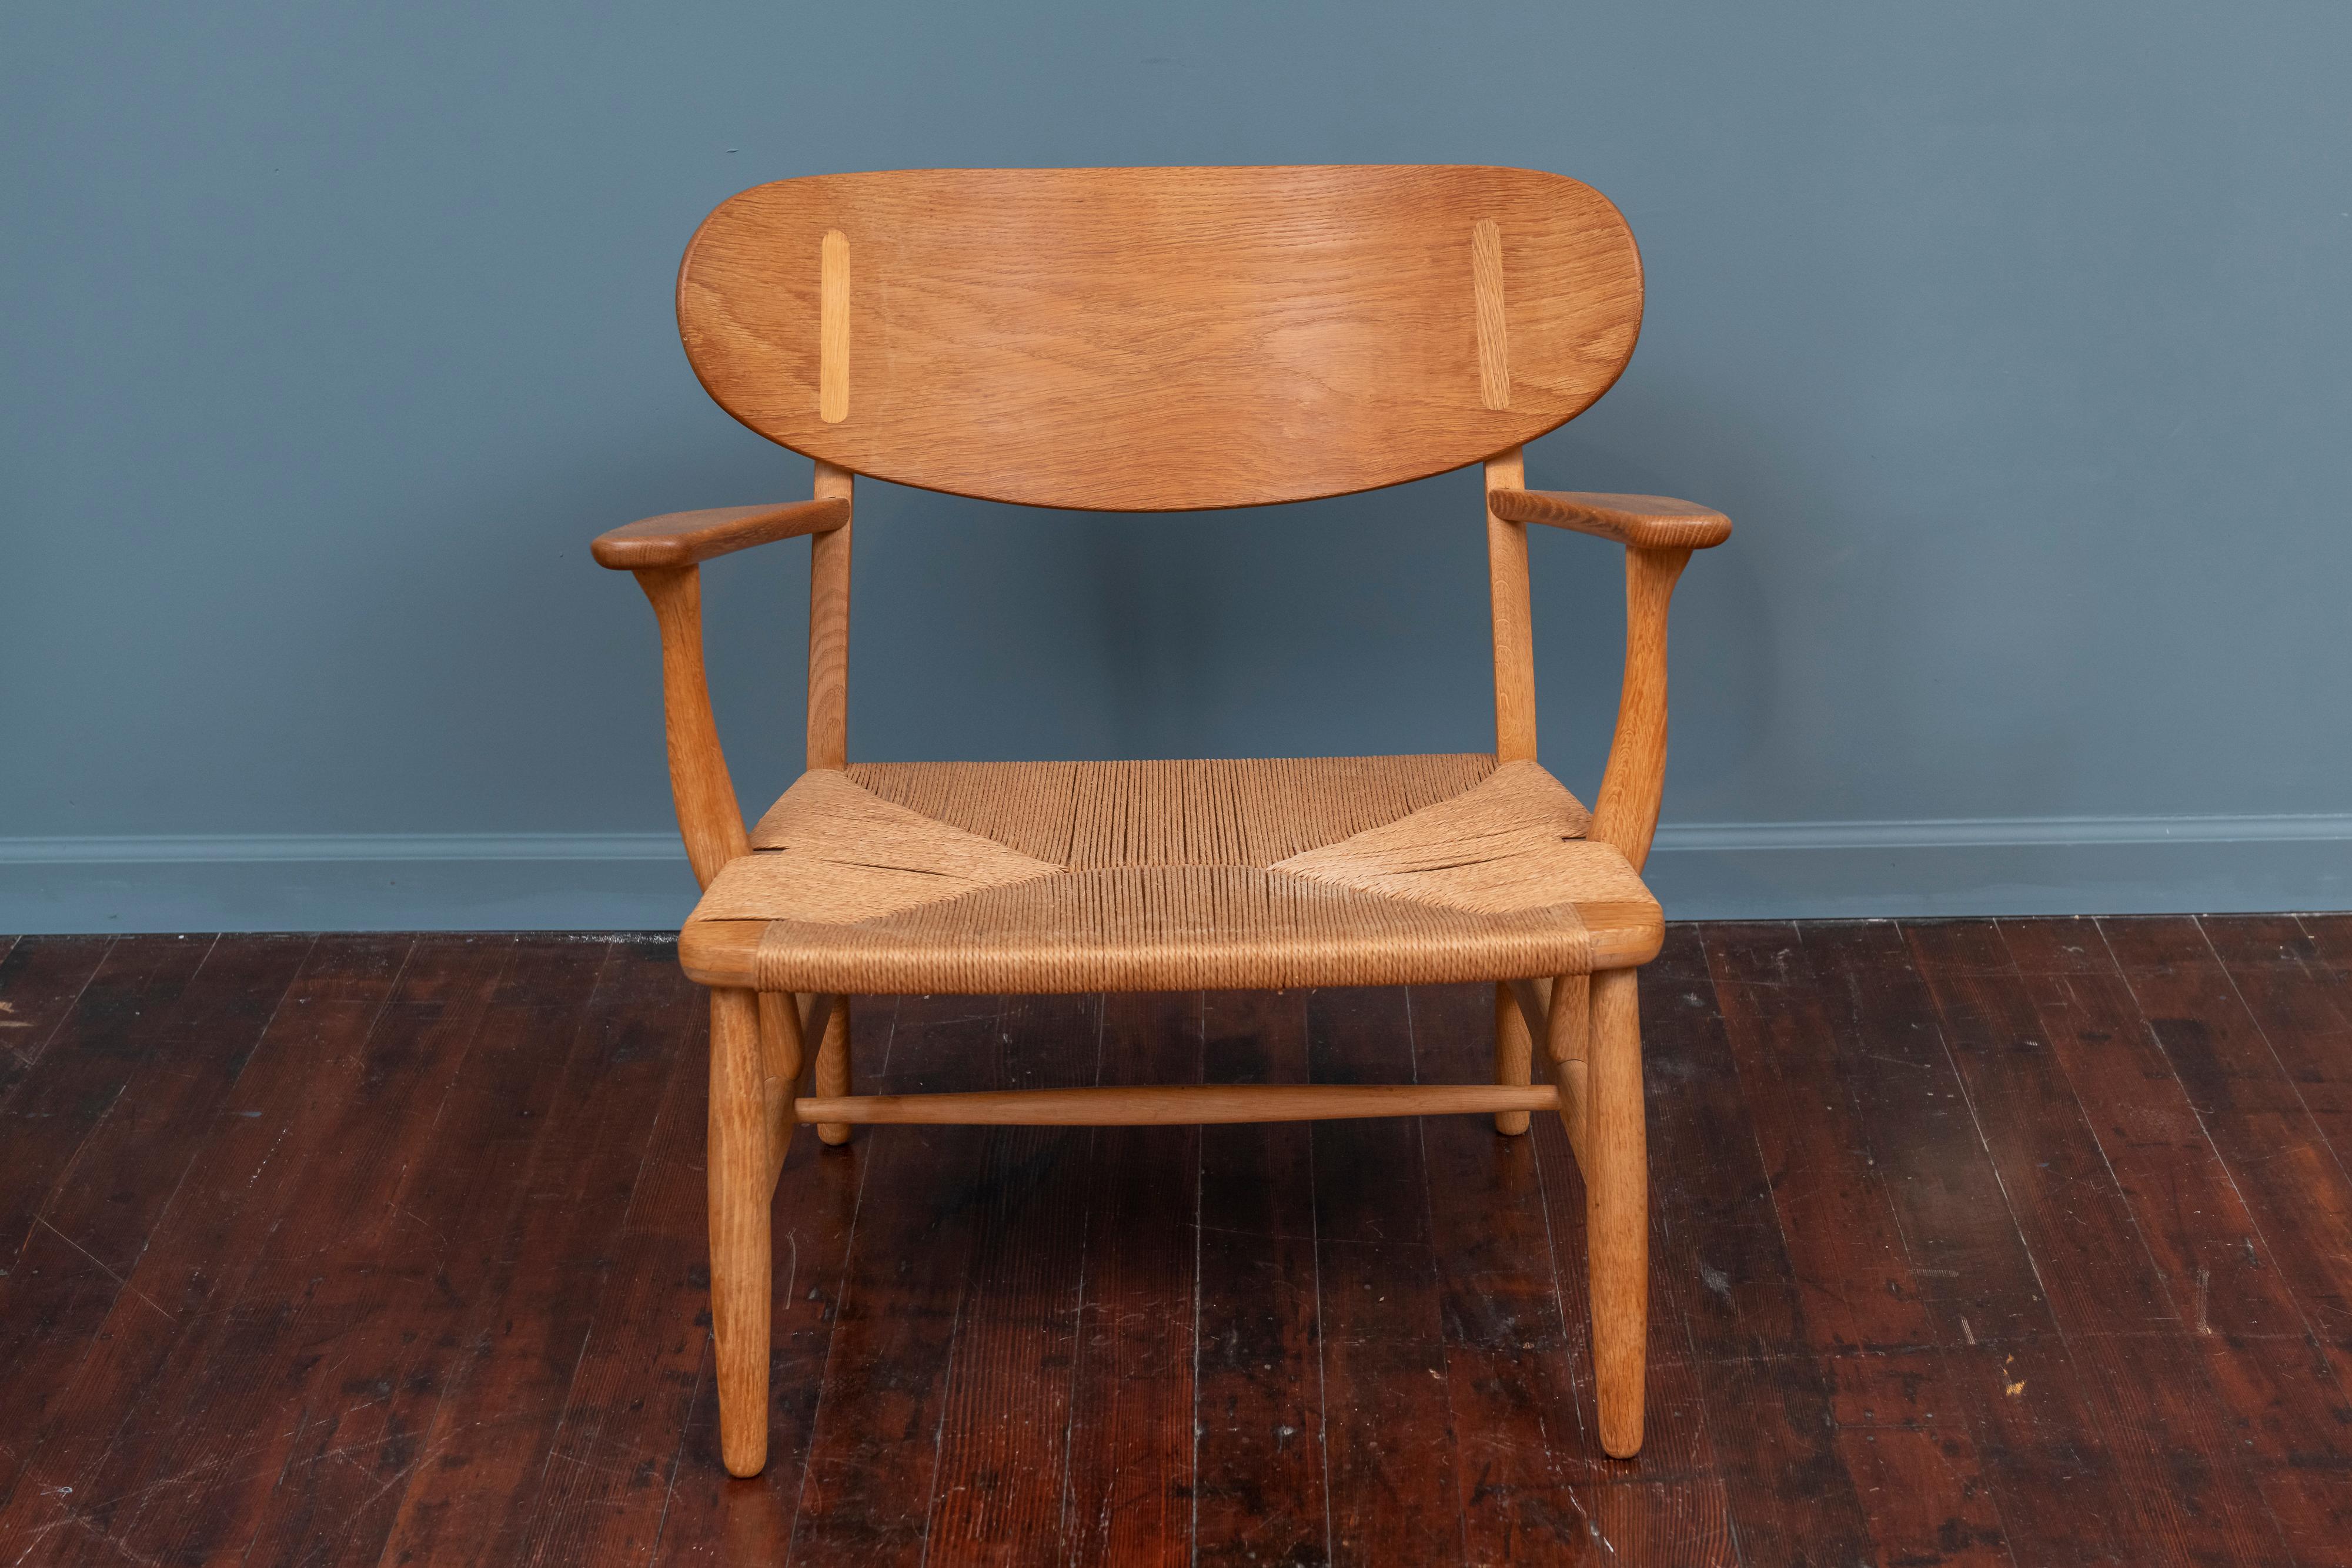 Hans Wegner CH-22 oak and teak lounge chair for Carl Hansen & Son, Denmark. Beautiful vintage production example fully stamped underneath the arm and in very good original condition. Organic, sculptural design that is timeless and comfortable.